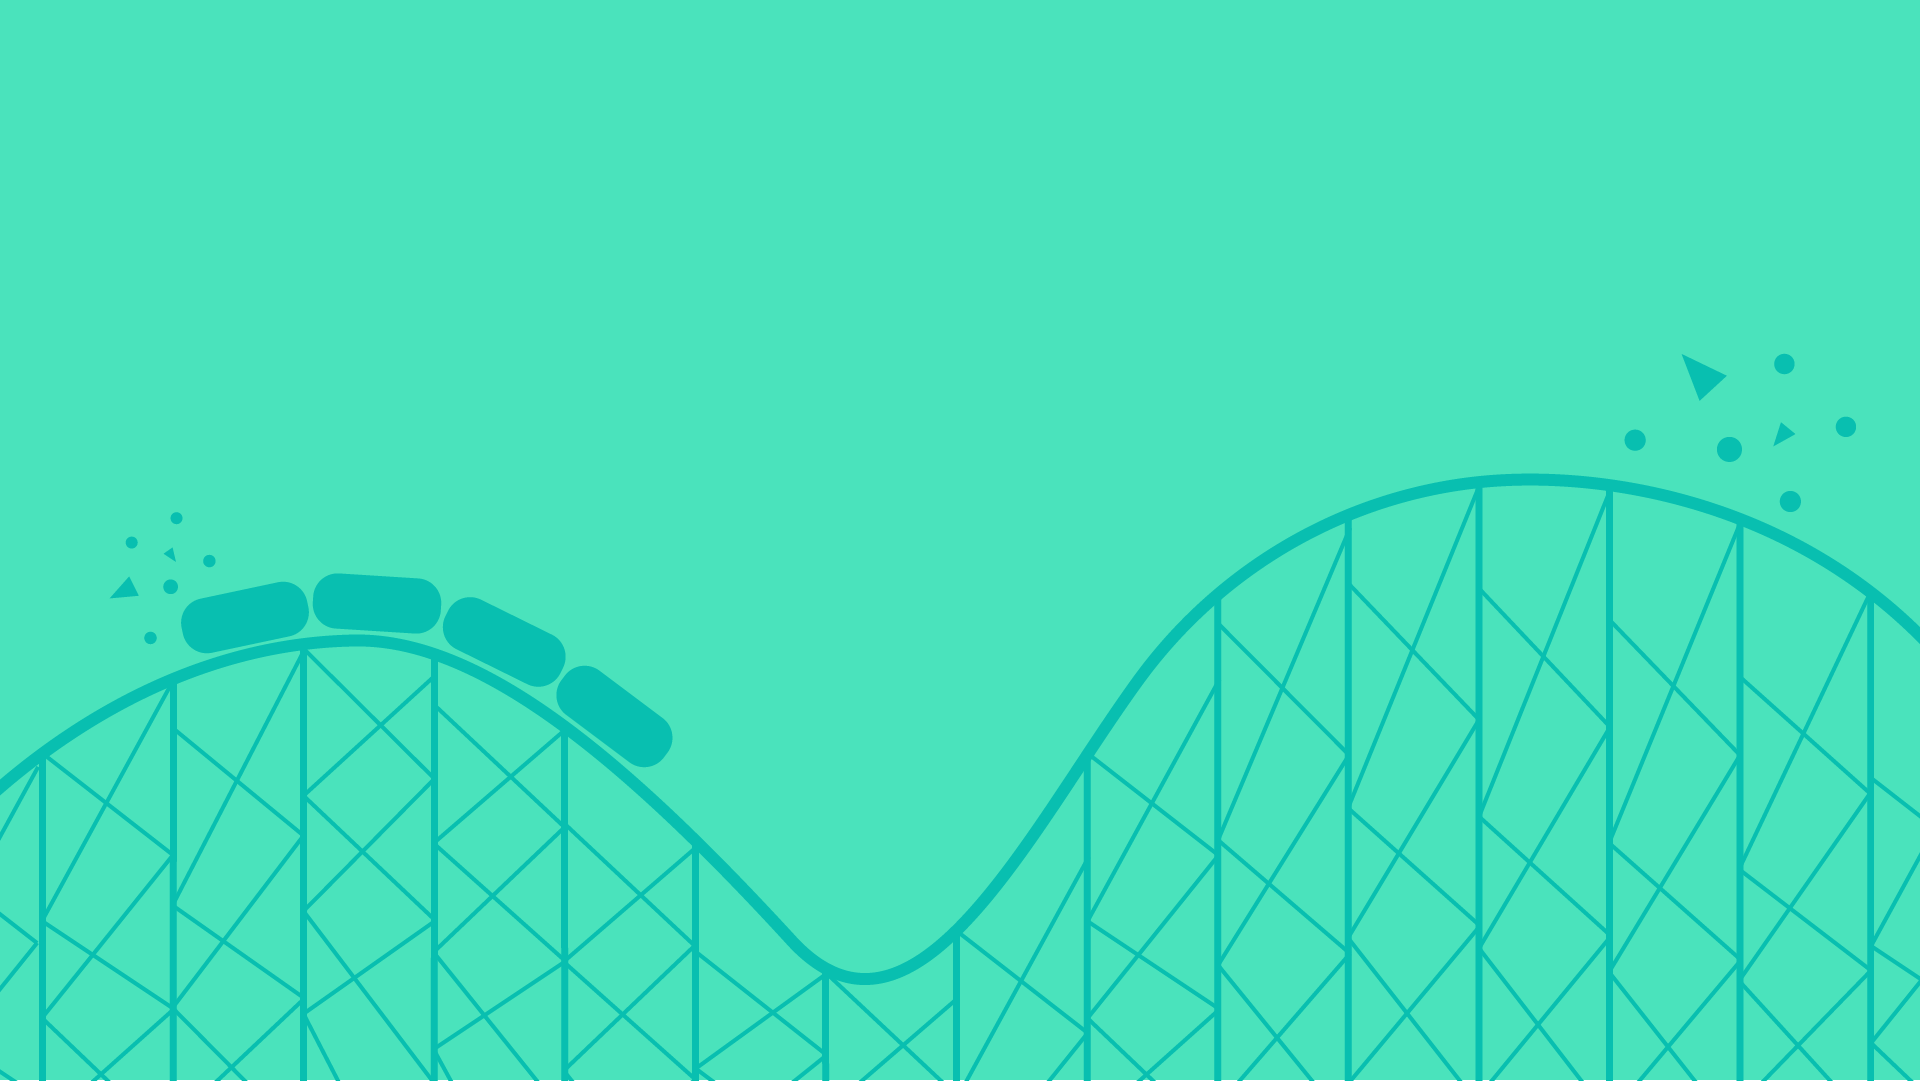 marketing roller coaster illustration representing workflow fluctuations.